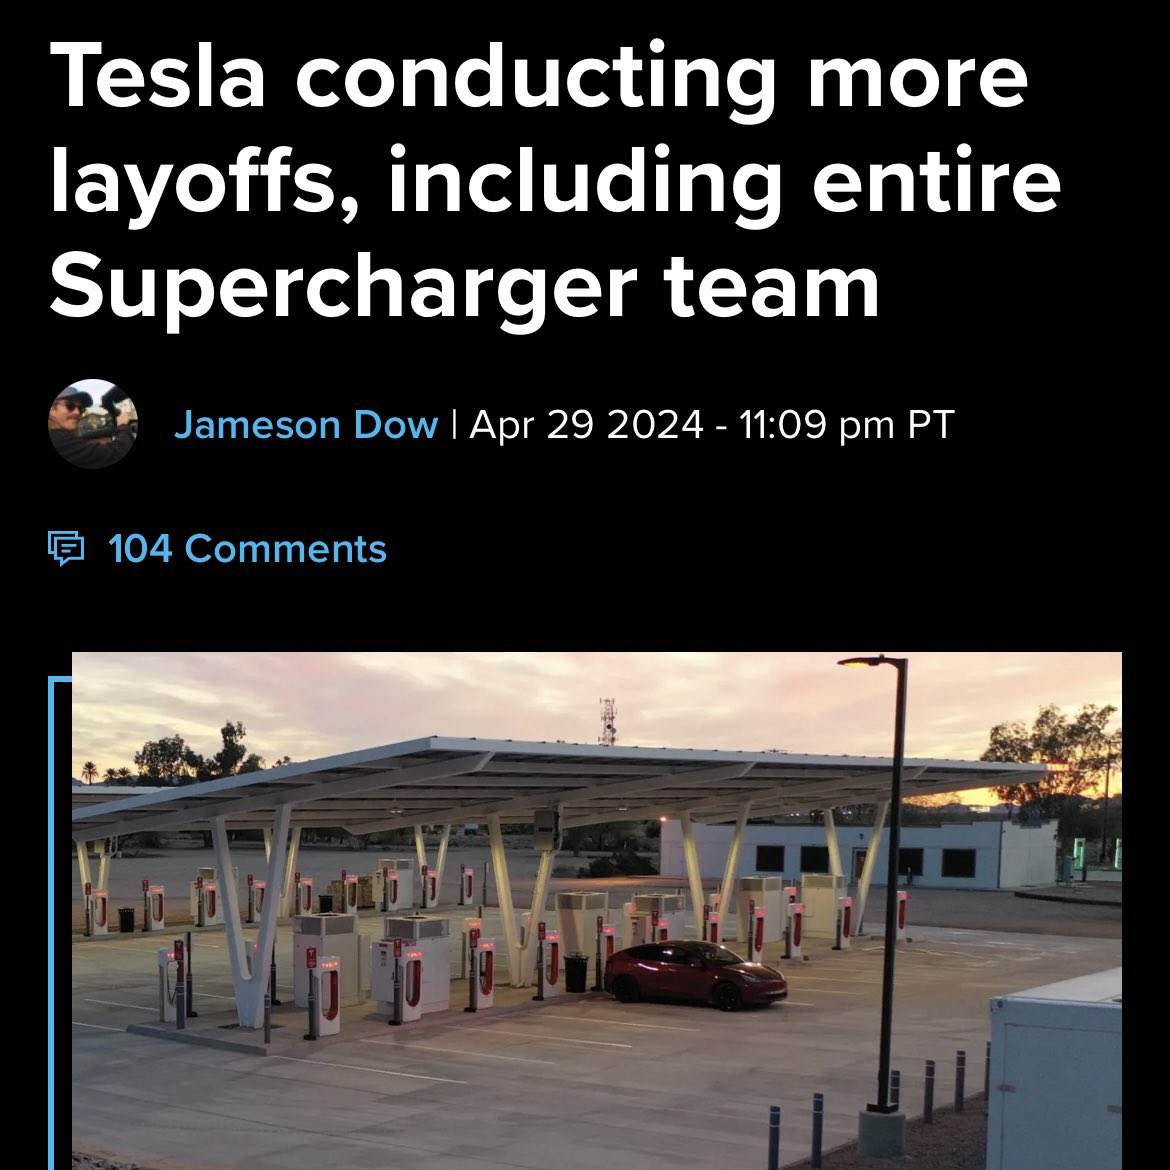 A tale of two headlines: Hours after Tesla stock sees a 15% stock surge after a “home run” deal, Tesla announced layoffs of hundreds of employees - many of them Austinites.